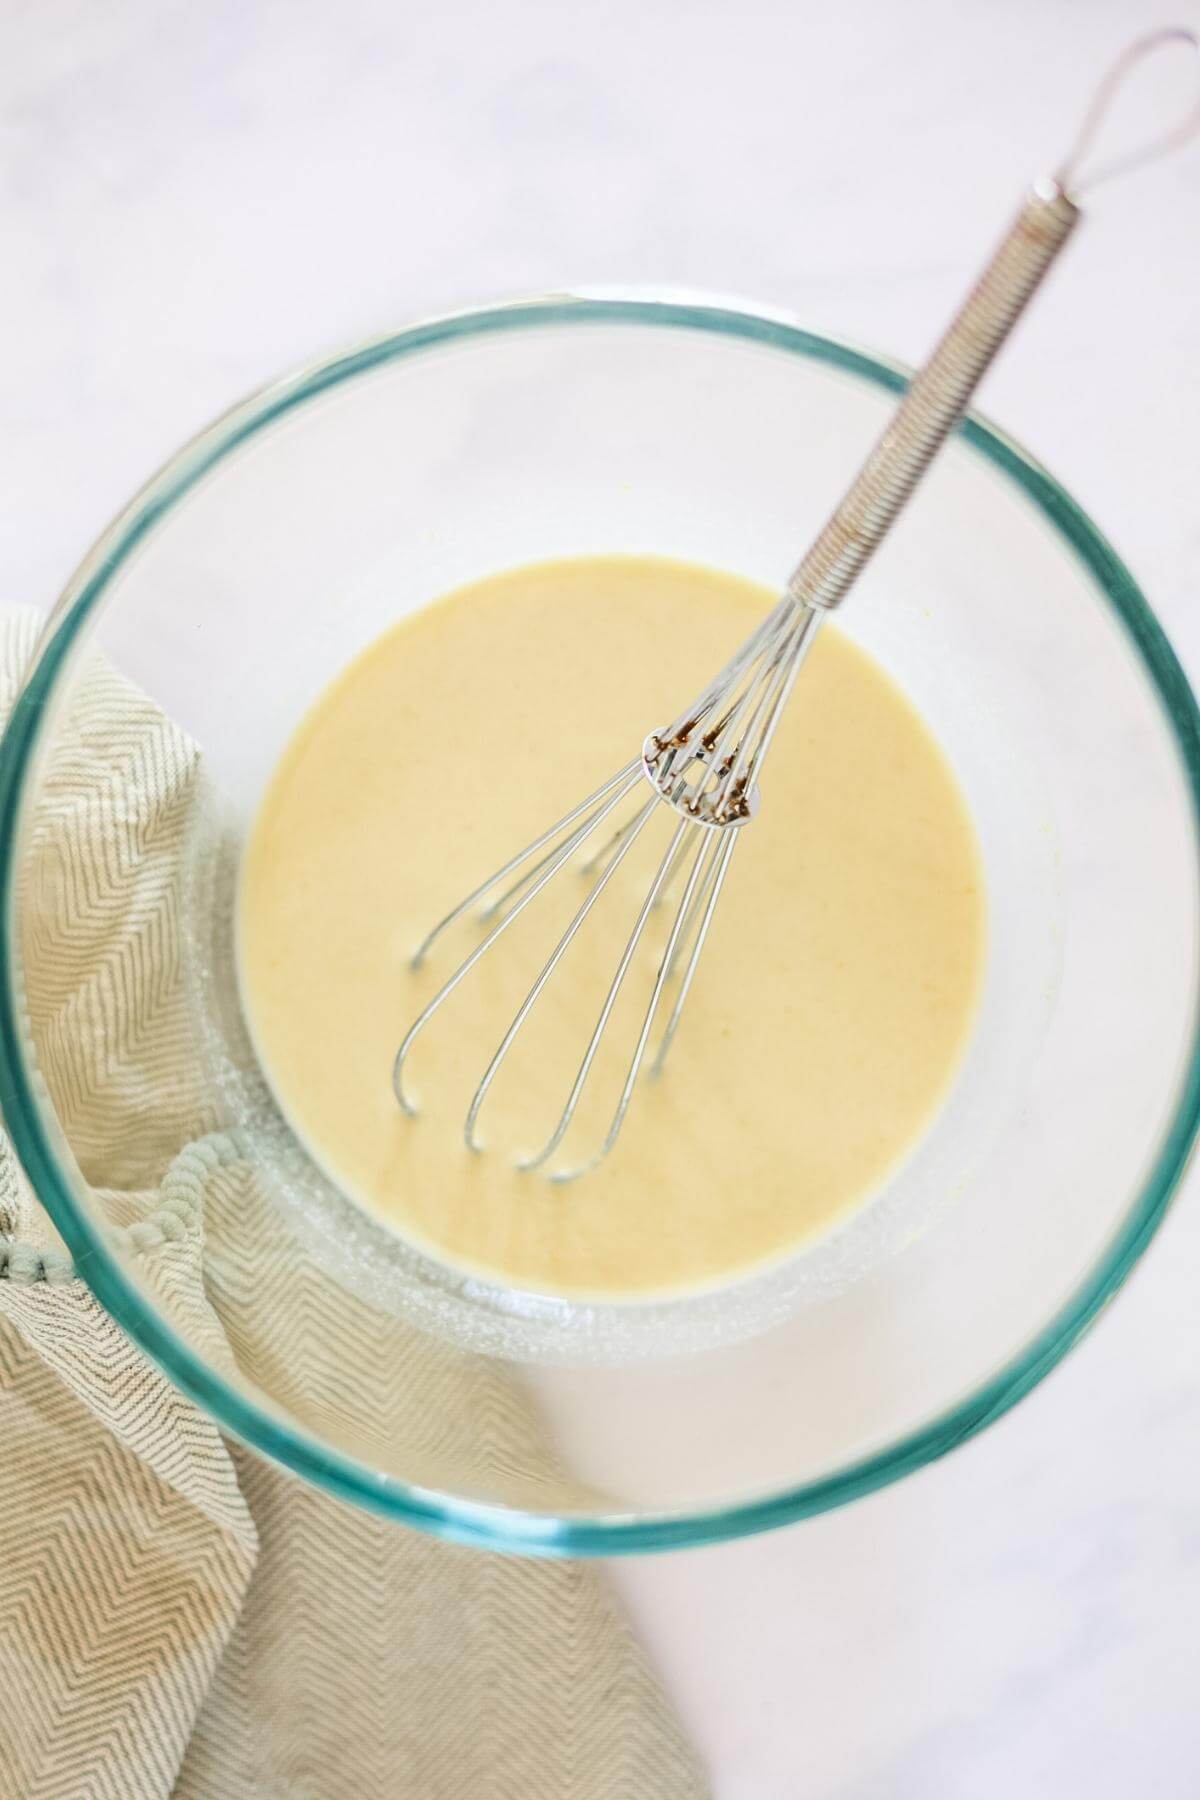 View from above of a small glass bowl containing cream sauce and a metal whisk.